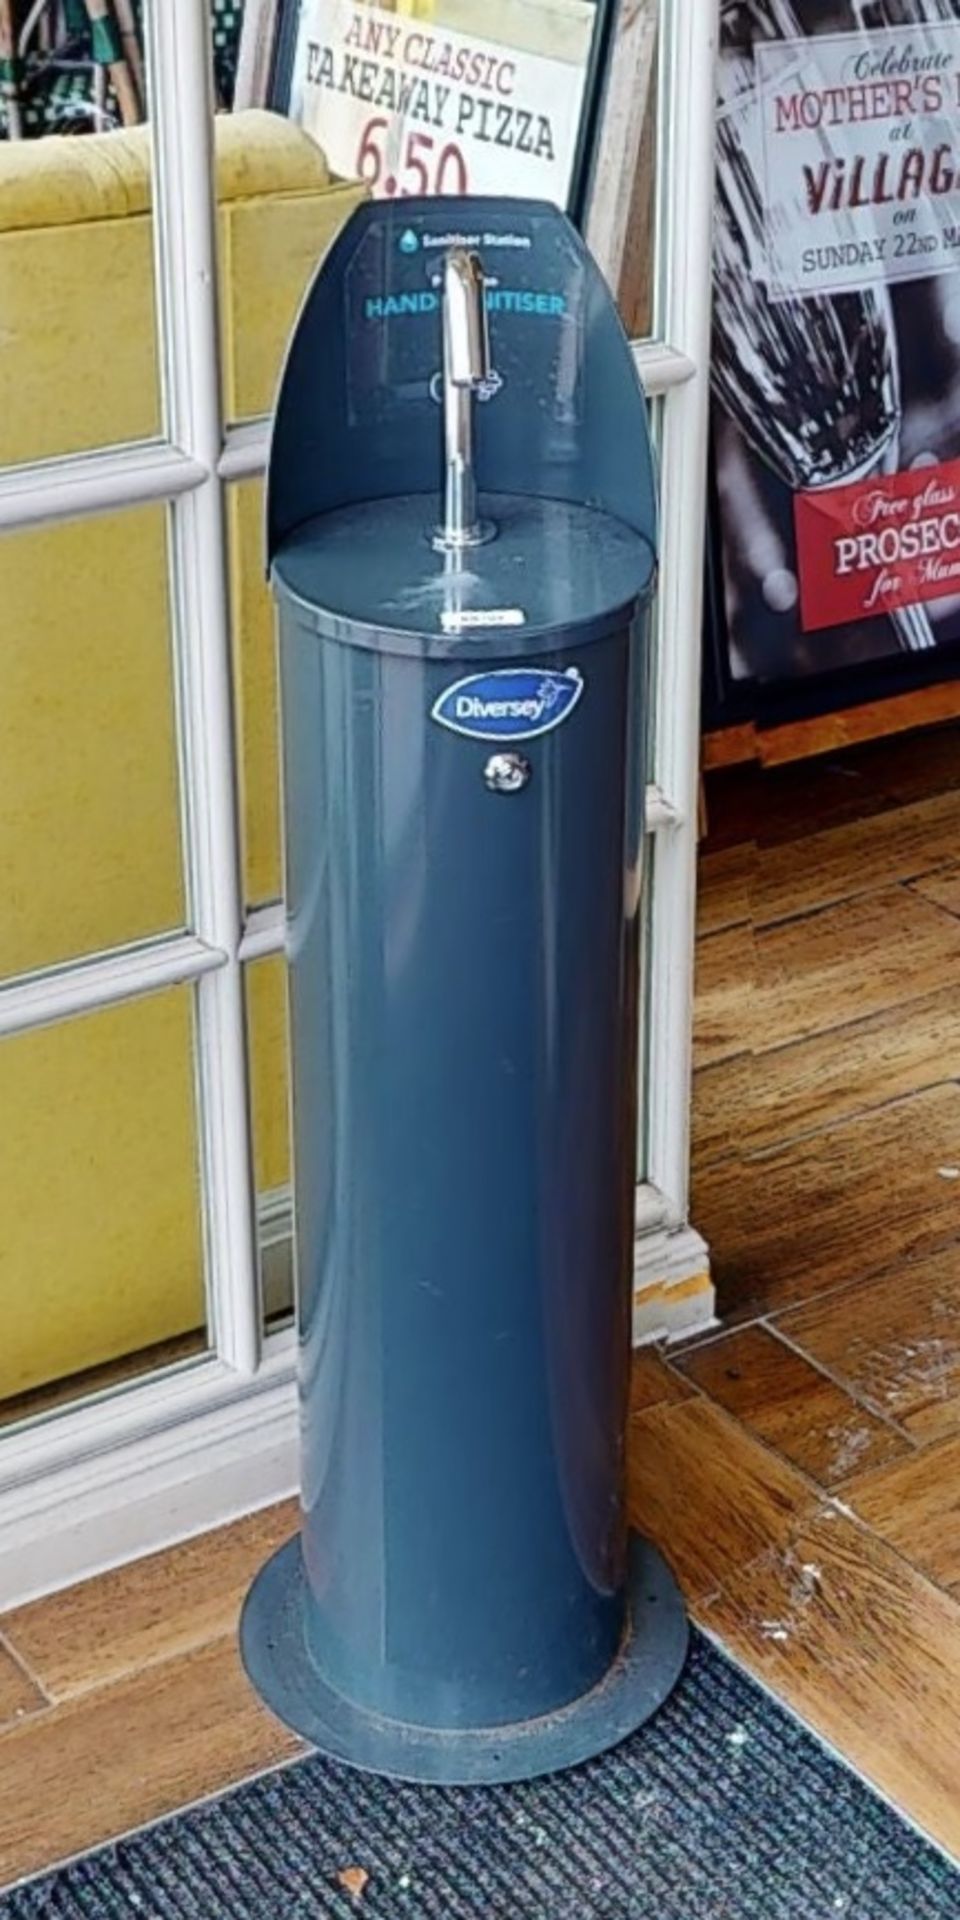 1 x Diversey Freestanding Touchless Hand Sanitising Station - Sensor Operated For Hands Free